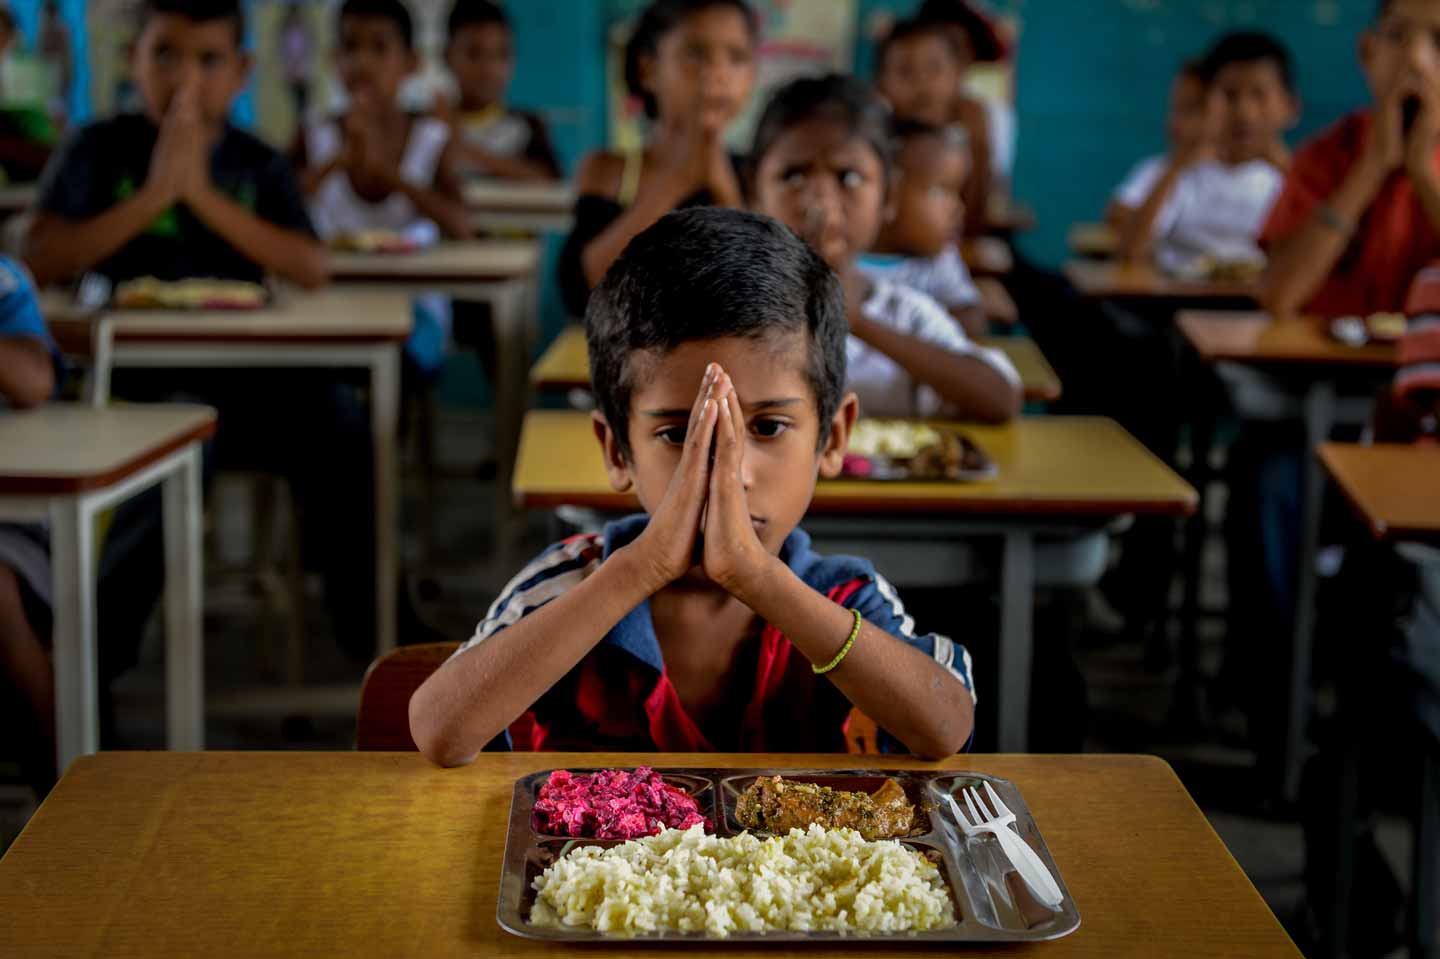 © Federico Parra. Children pray before eating at a shanty town in Higuerote, 117 km east of Caracas on August 26, 2016. As part of a volunteer program, thousands of Venezuelan children receive their school meals during holidays in an initiative to address food shortages affecting the country.